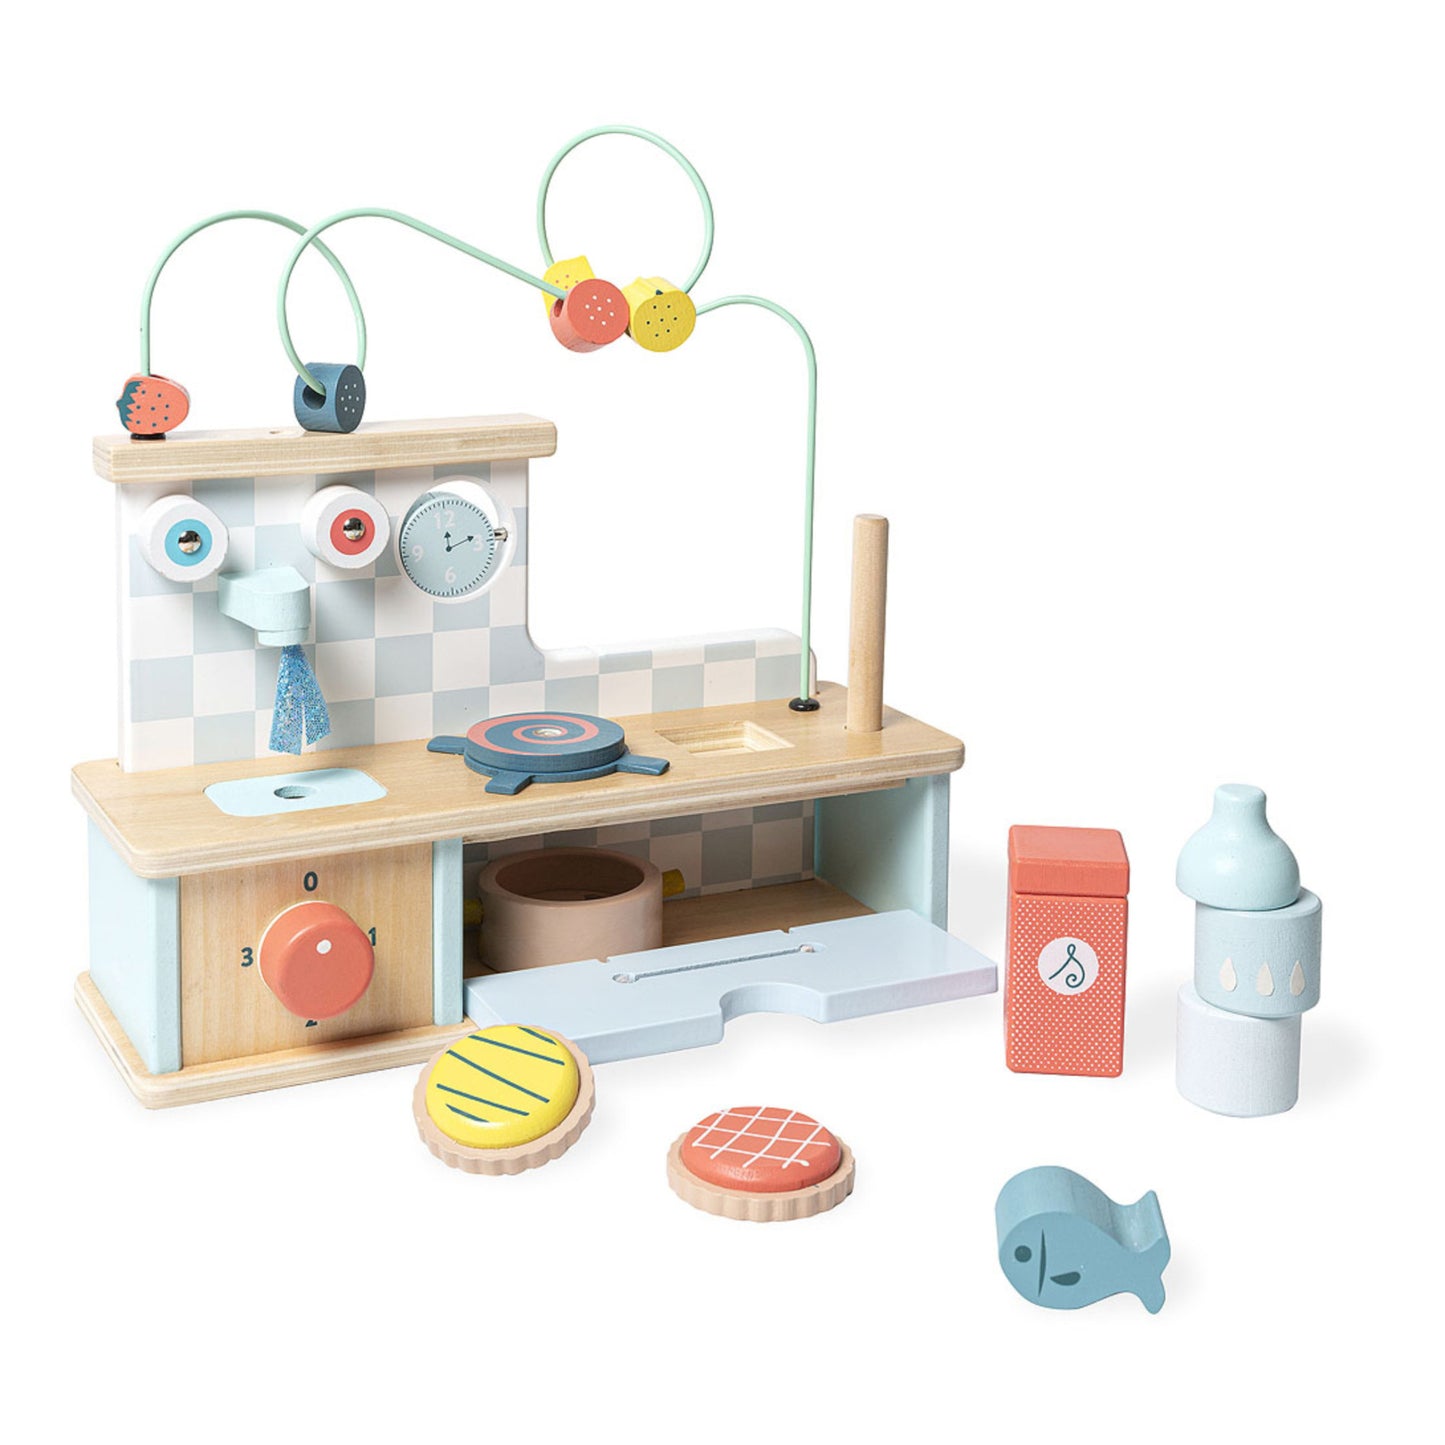 Early-learning Multi-activity Kitchen